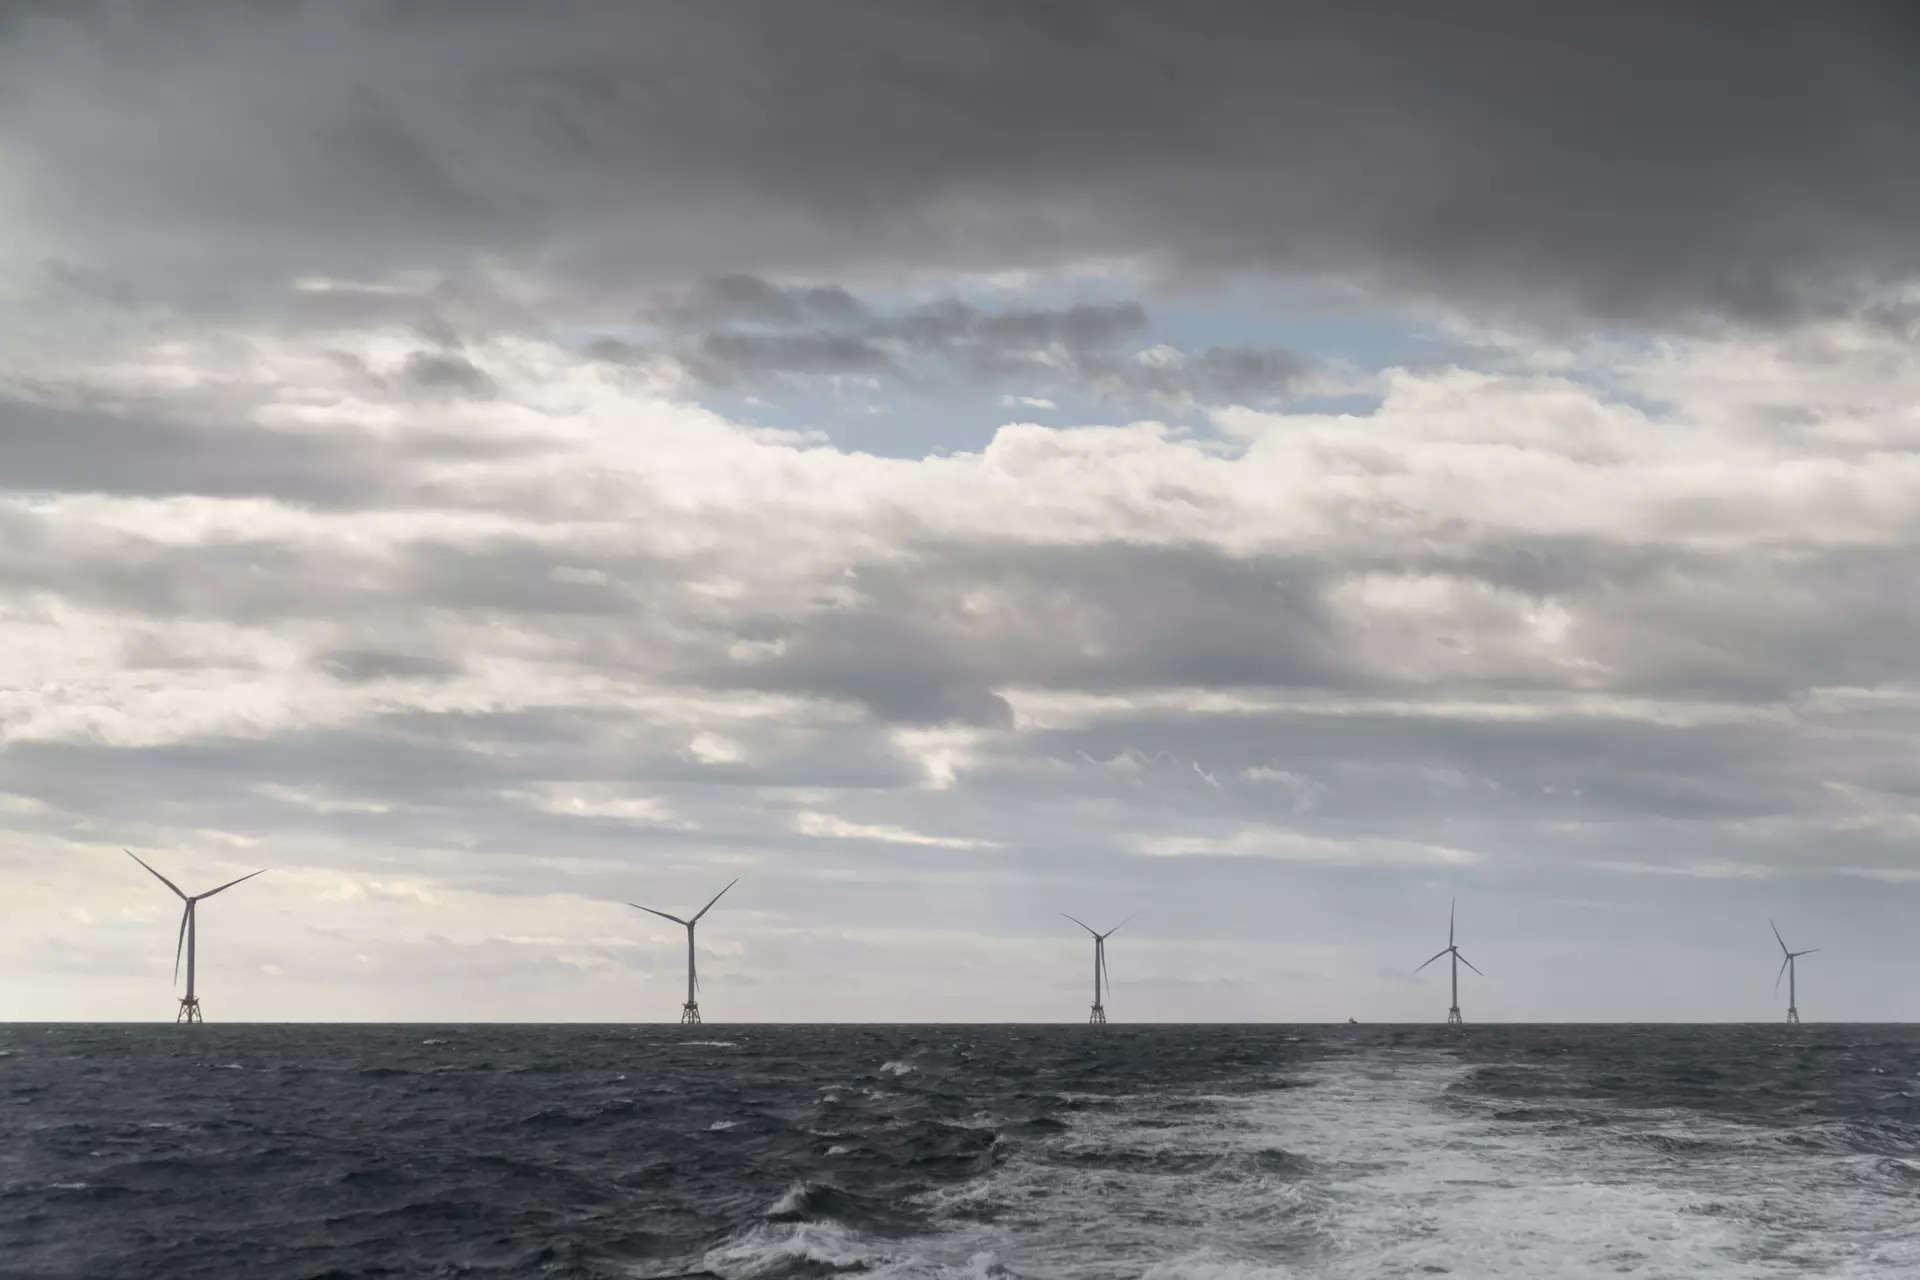 Shell may drop Norway offshore wind bid on business case concerns, ET EnergyWorld